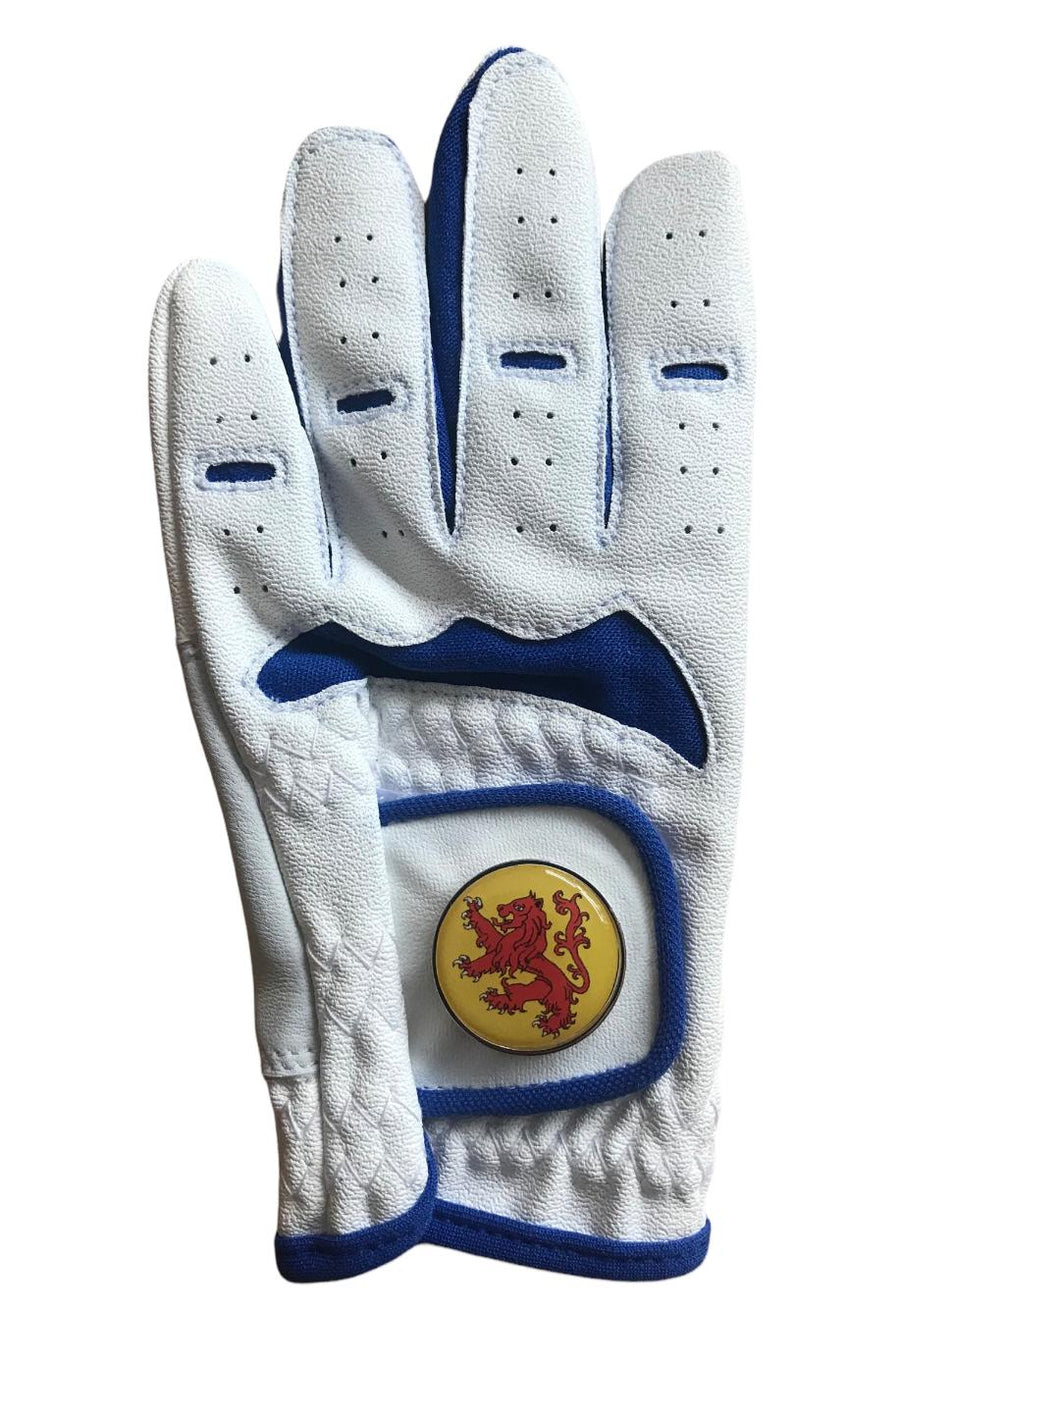 NEW Junior Blue / White All Weather Golf Glove. Scotland Lion Ball Marker. Small, Medium or Large.